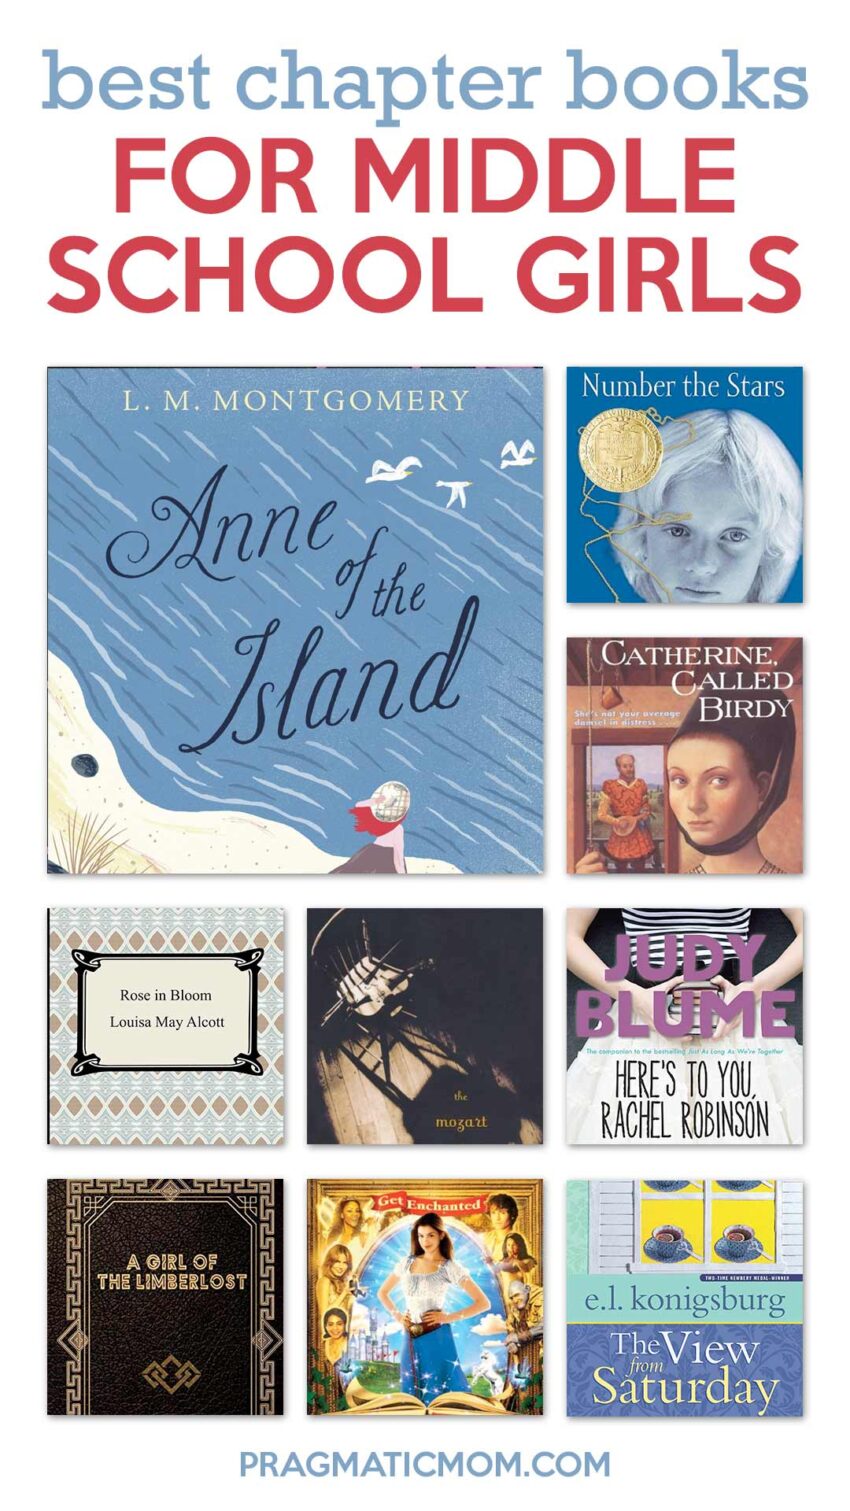 Best Chapter Books for Middle School Girls